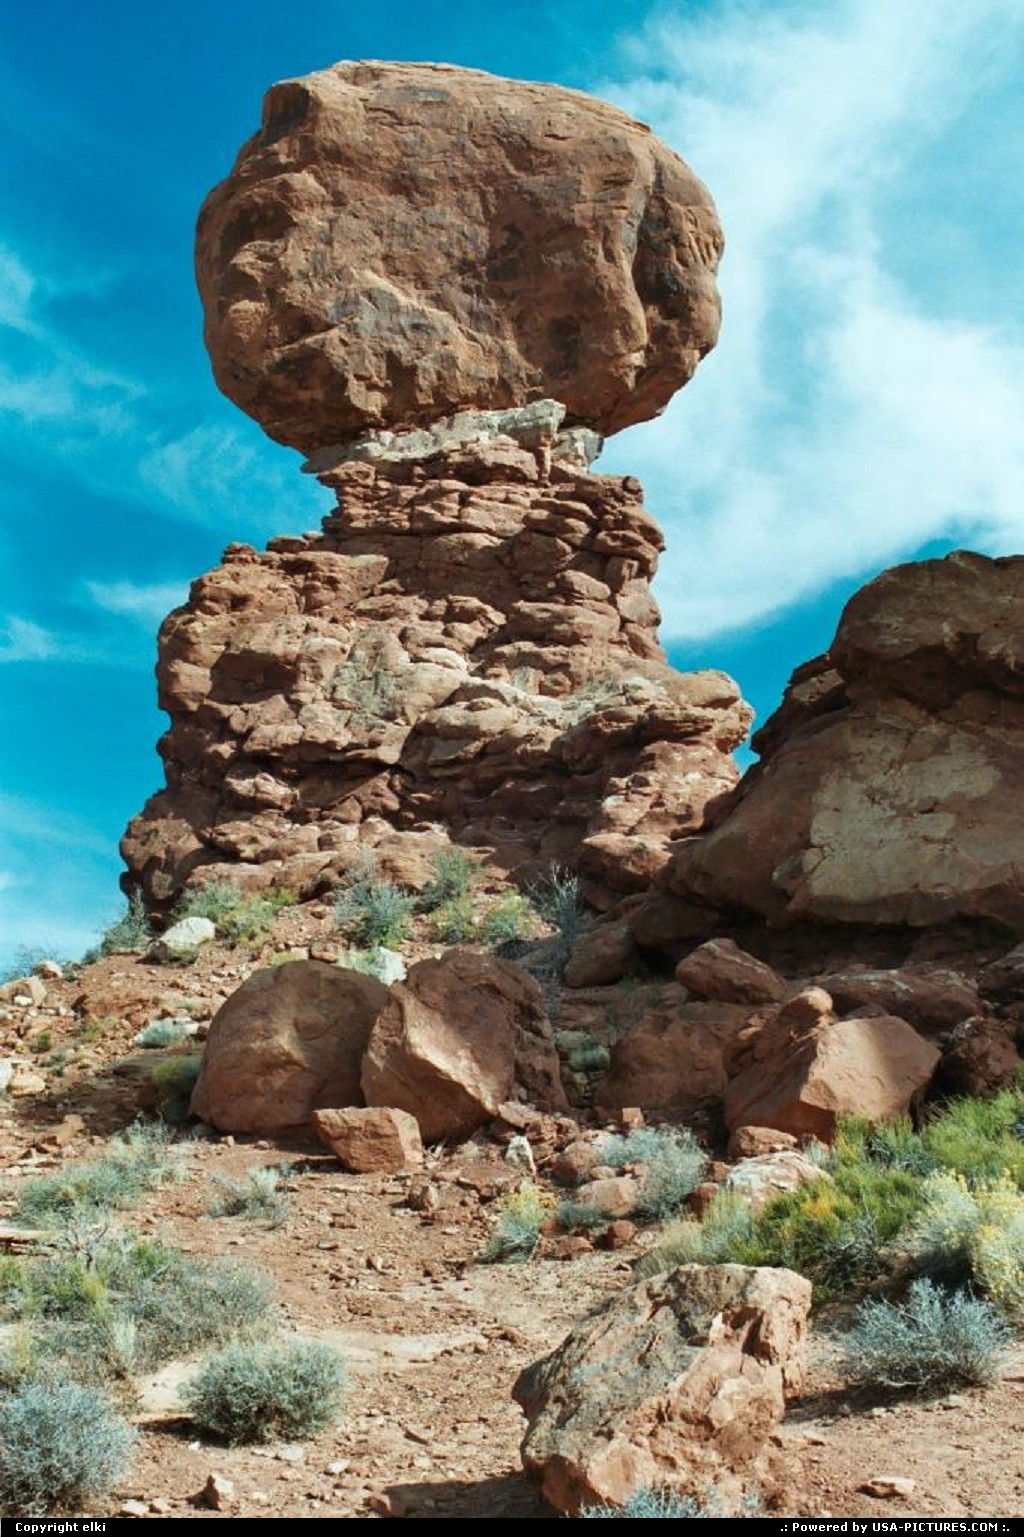 Picture by elki:  Utah Arches Balanced Rock rock, trail